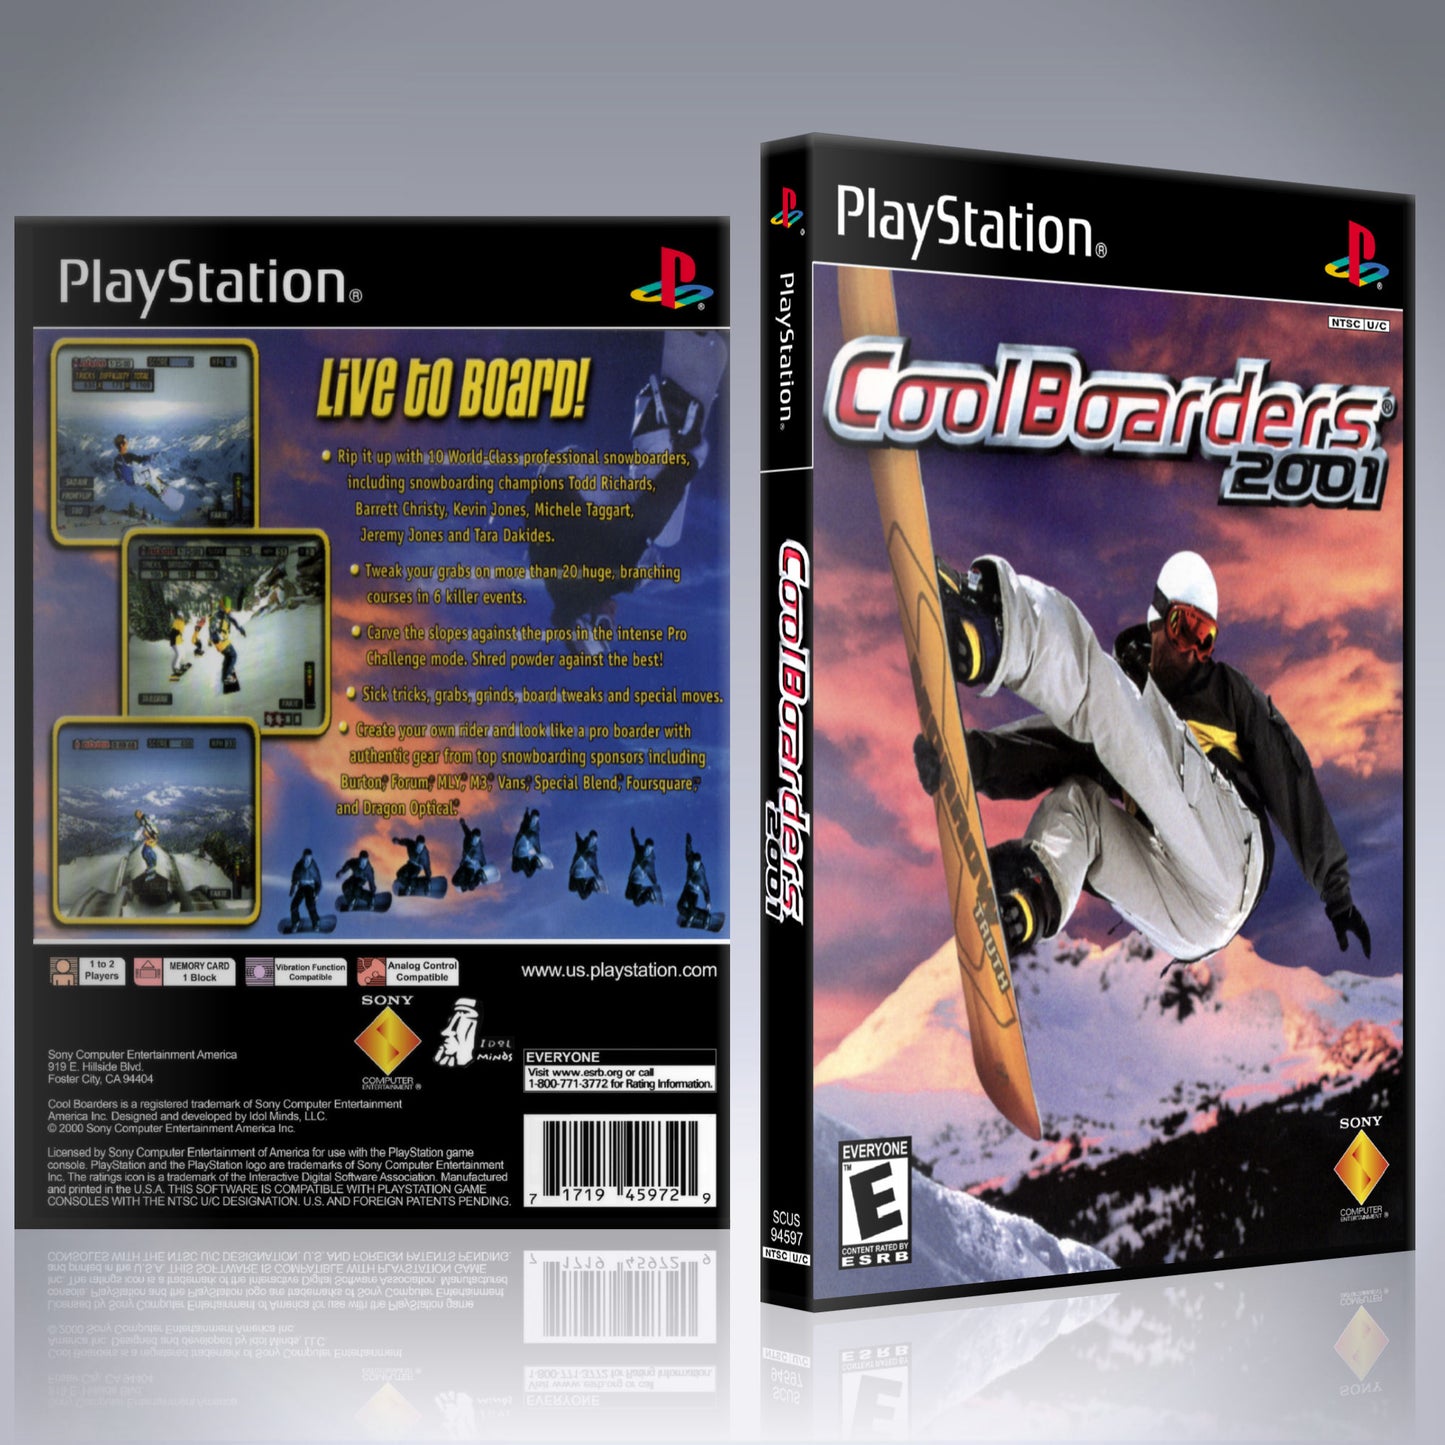 PS1 Case - NO GAME - Cool Boarders 2001